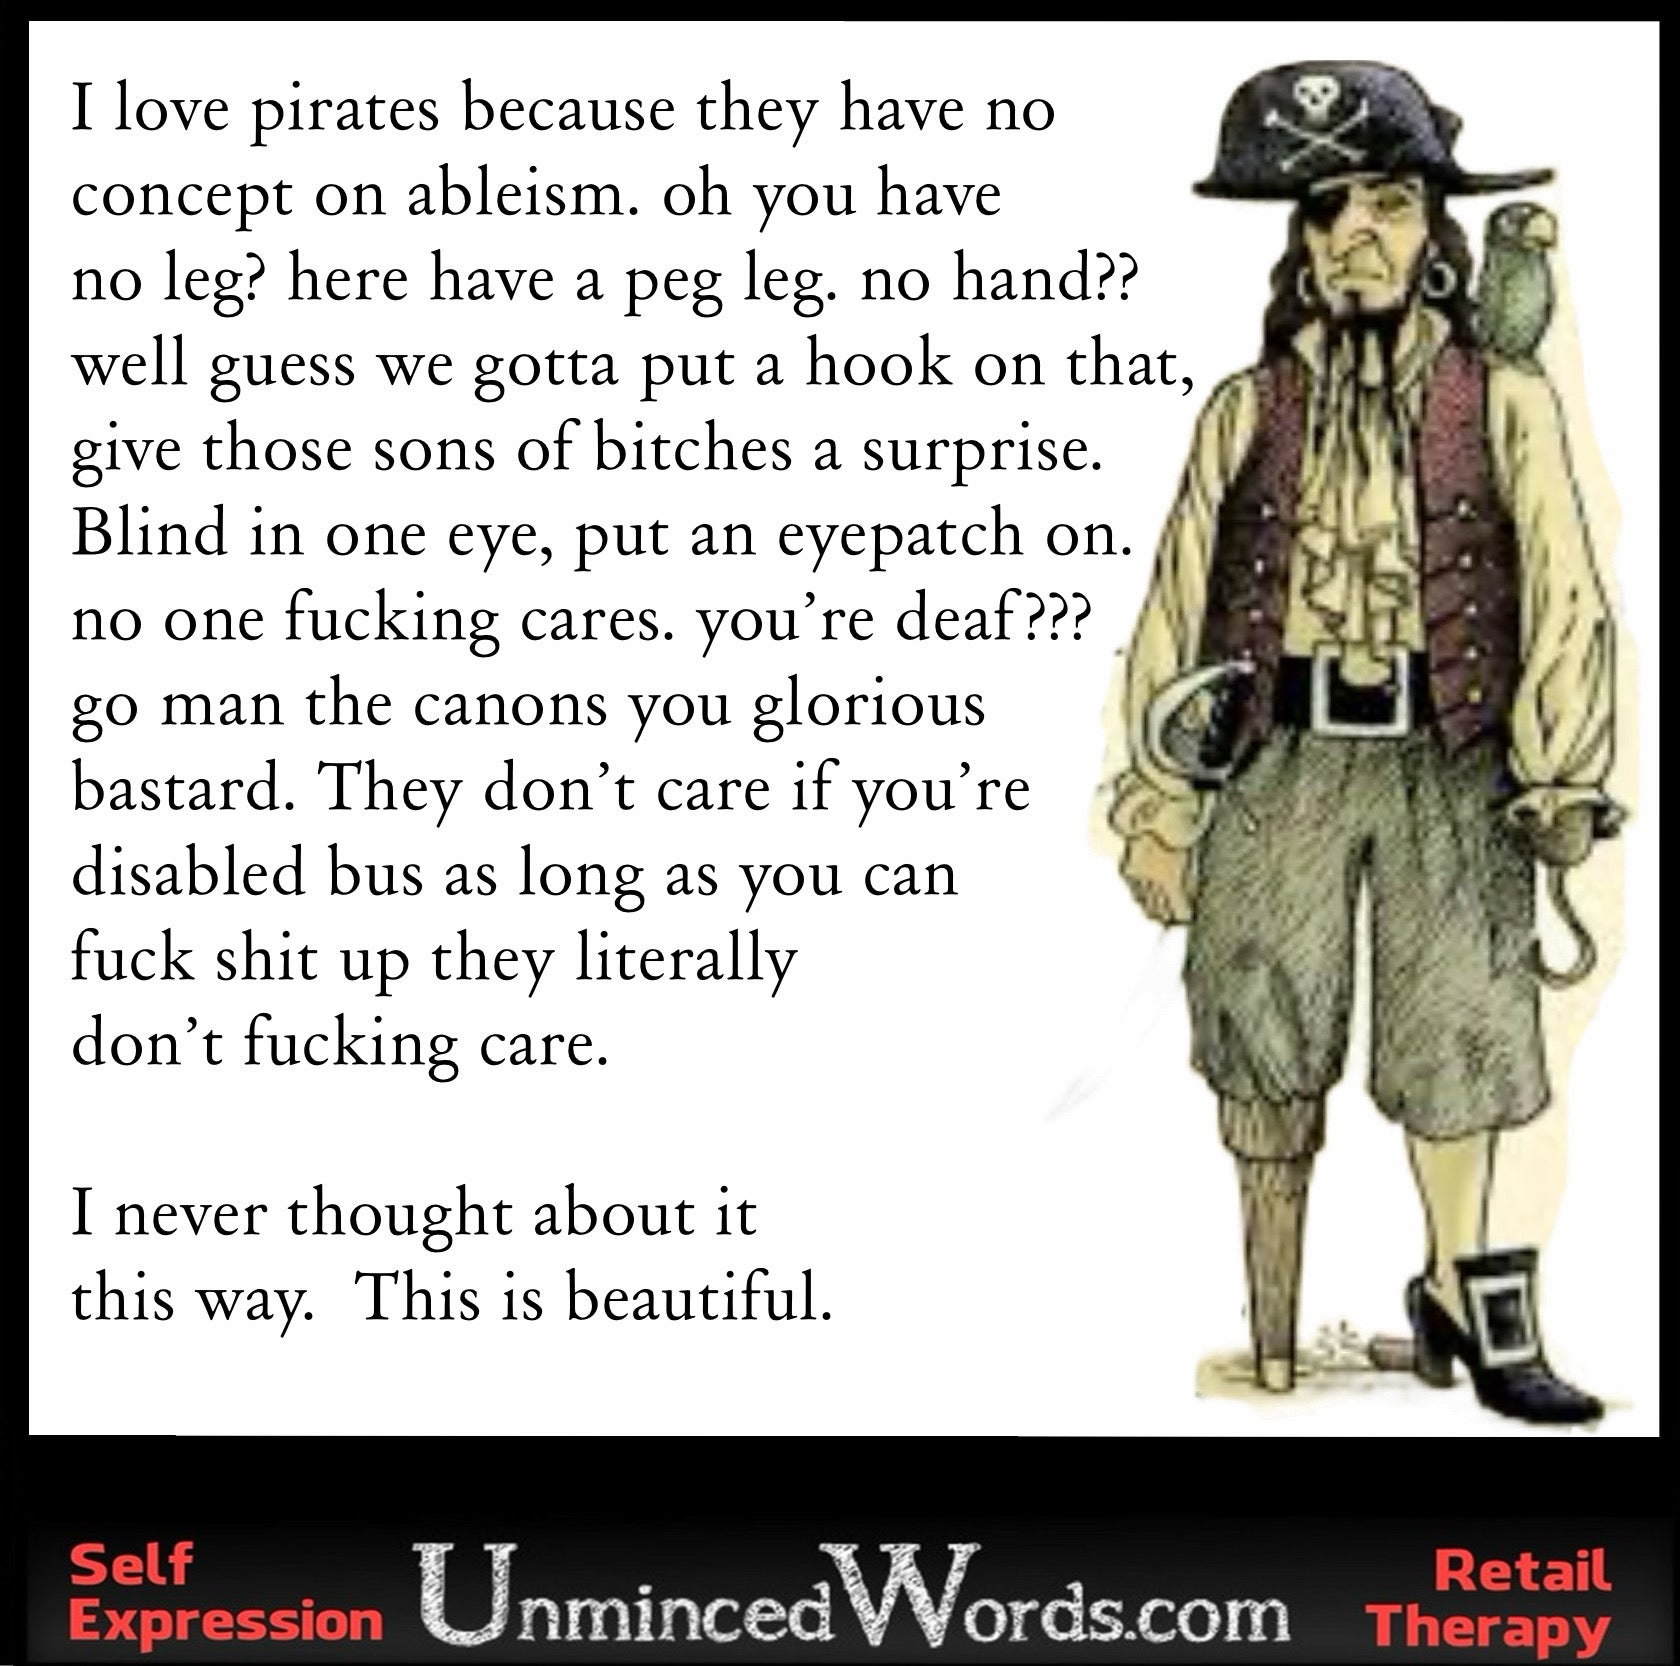 Pirates, as seen in a new light